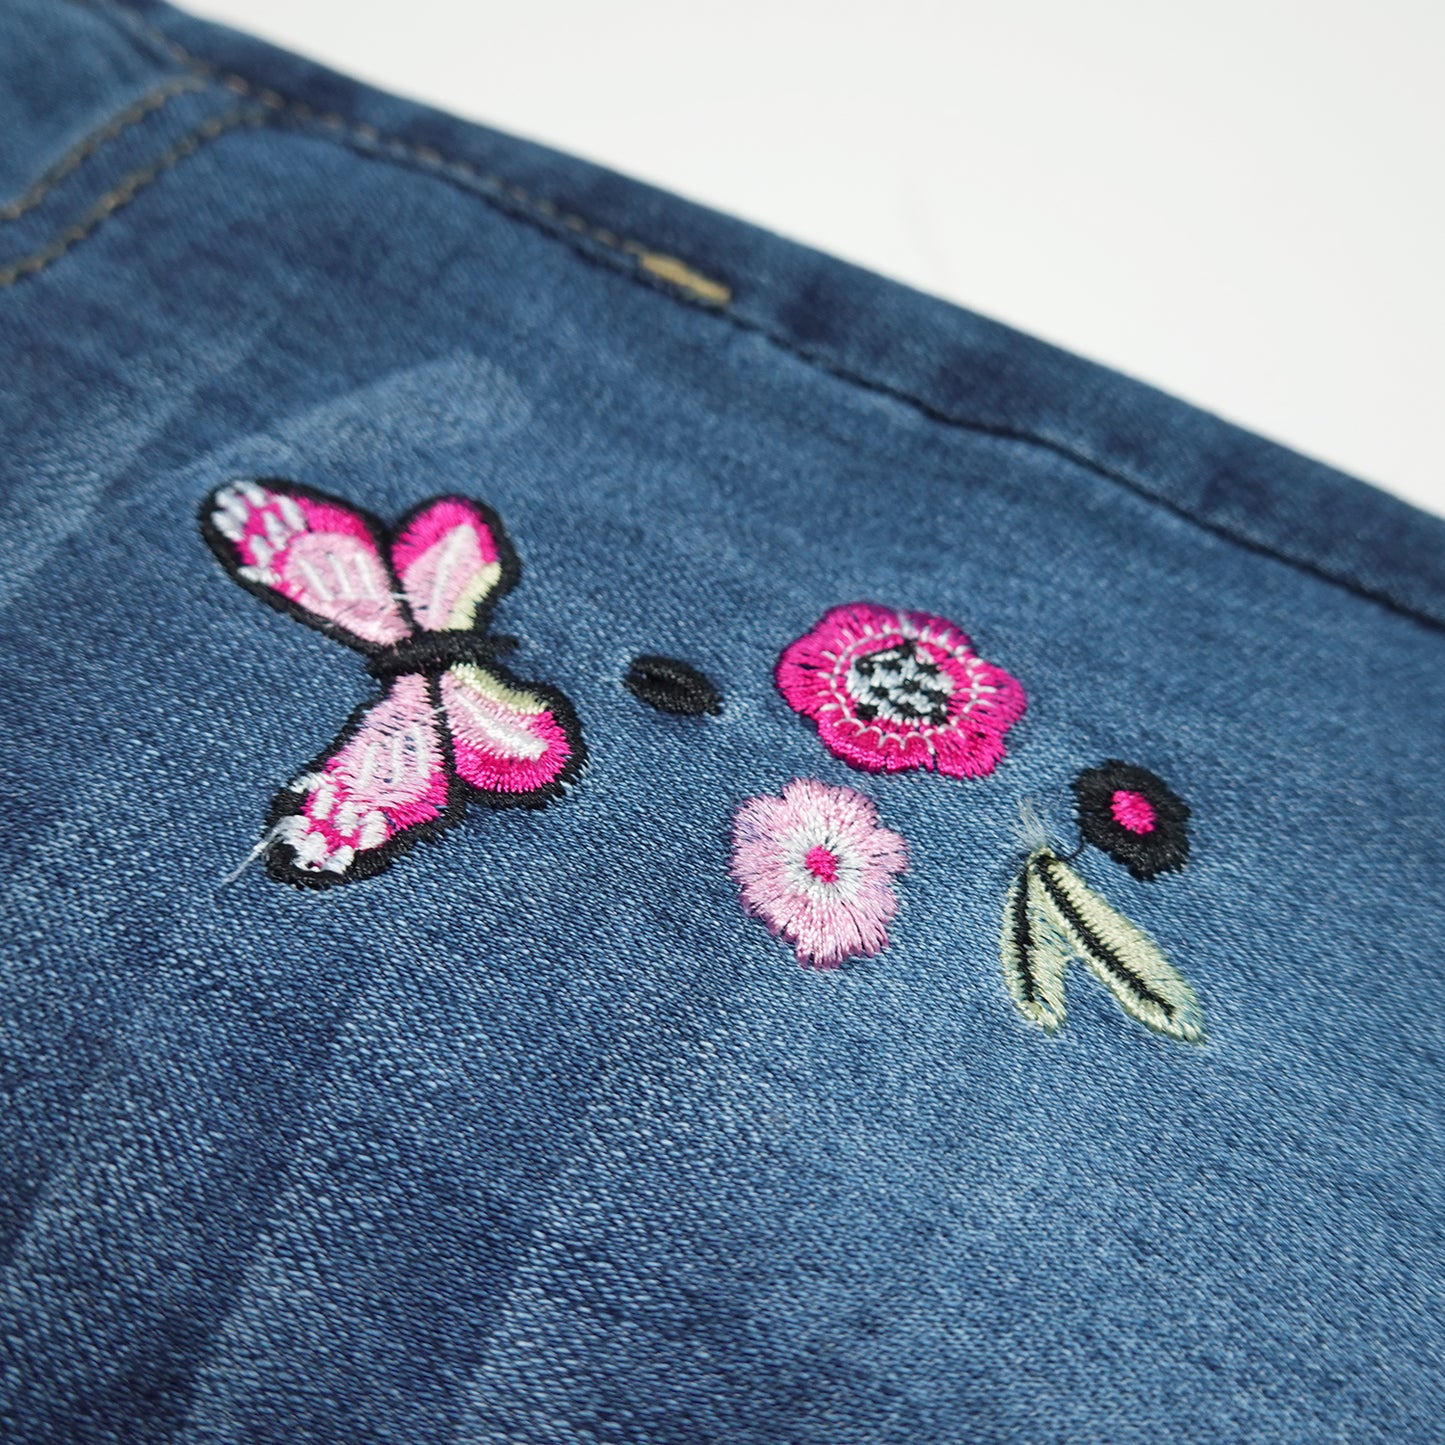 Little Girls Elastic Band Embroidered Butterfly Soft Denim Slim Pants Jeans